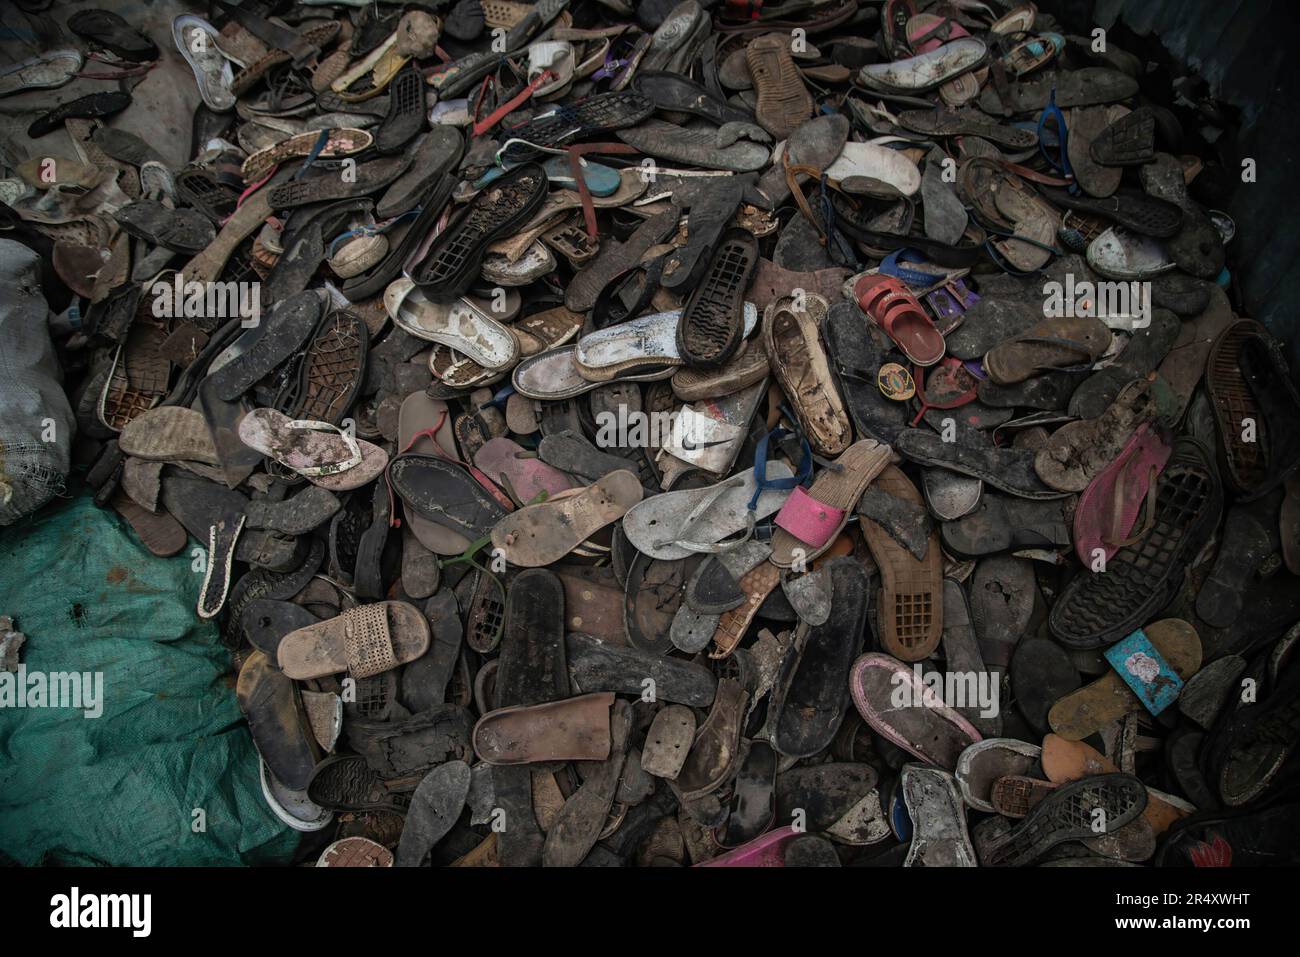 A pile of shoe waste at a plastic recycling plant in Nakuru. Negotiators have gathered in Paris, France for the second round of deliberations to develop a global treaty aimed at tackling the escalating issue of plastic pollution. According to a recent report by the United Nations Environment Programme (UNEP), countries have the potential to reduce plastic pollution by 80% by 2040 by eliminating unnecessary plastics, implementing recycling and reuse strategies, introducing deposit return schemes, and substituting plastic with sustainable alternative materials. Stock Photo